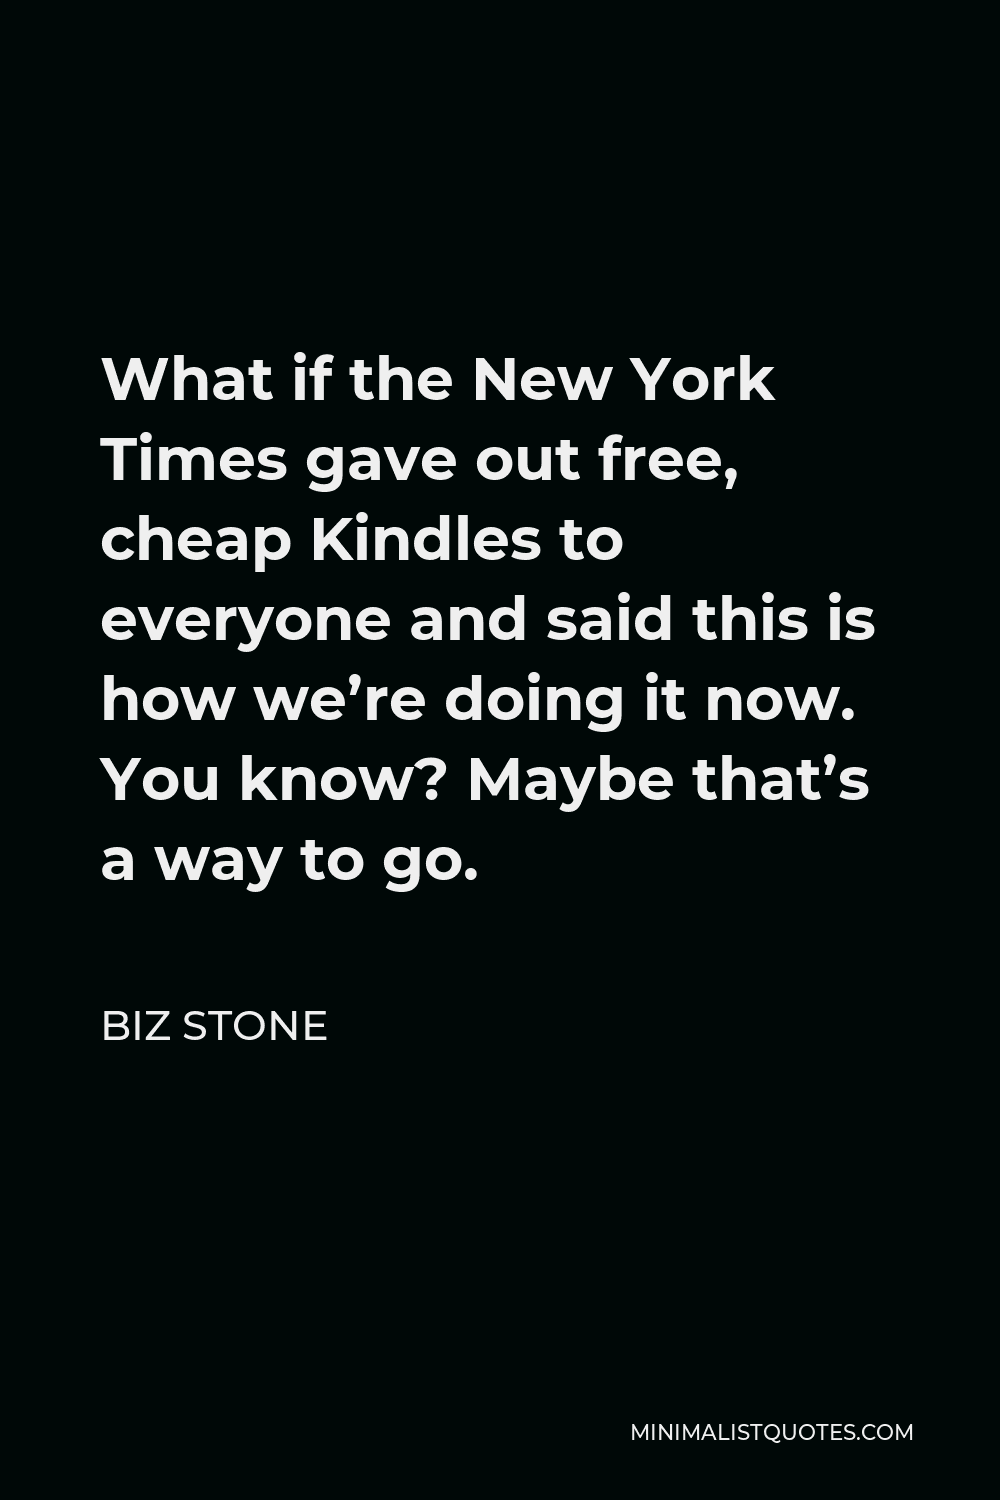 Biz Stone Quote - What if the New York Times gave out free, cheap Kindles to everyone and said this is how we’re doing it now. You know? Maybe that’s a way to go.